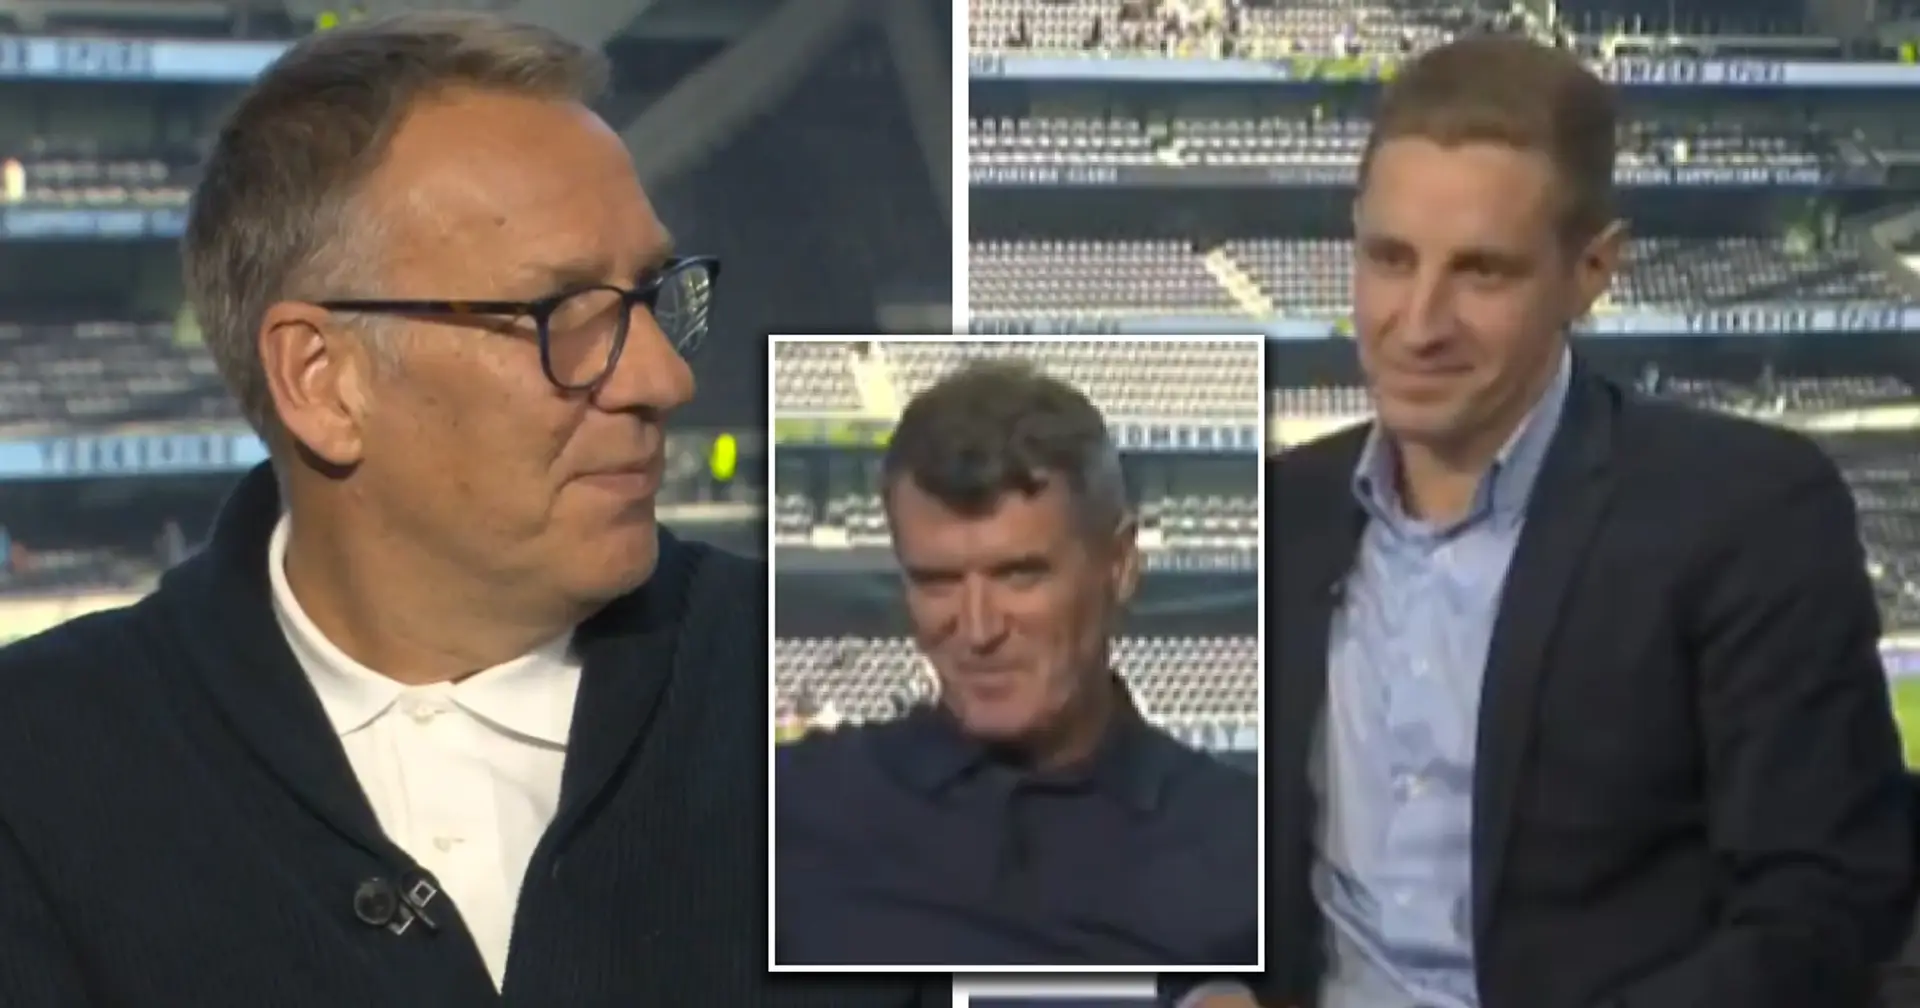 Paul Merson creates awkward moment in studio as tries to wind up former Spurs defender Michael Dawson